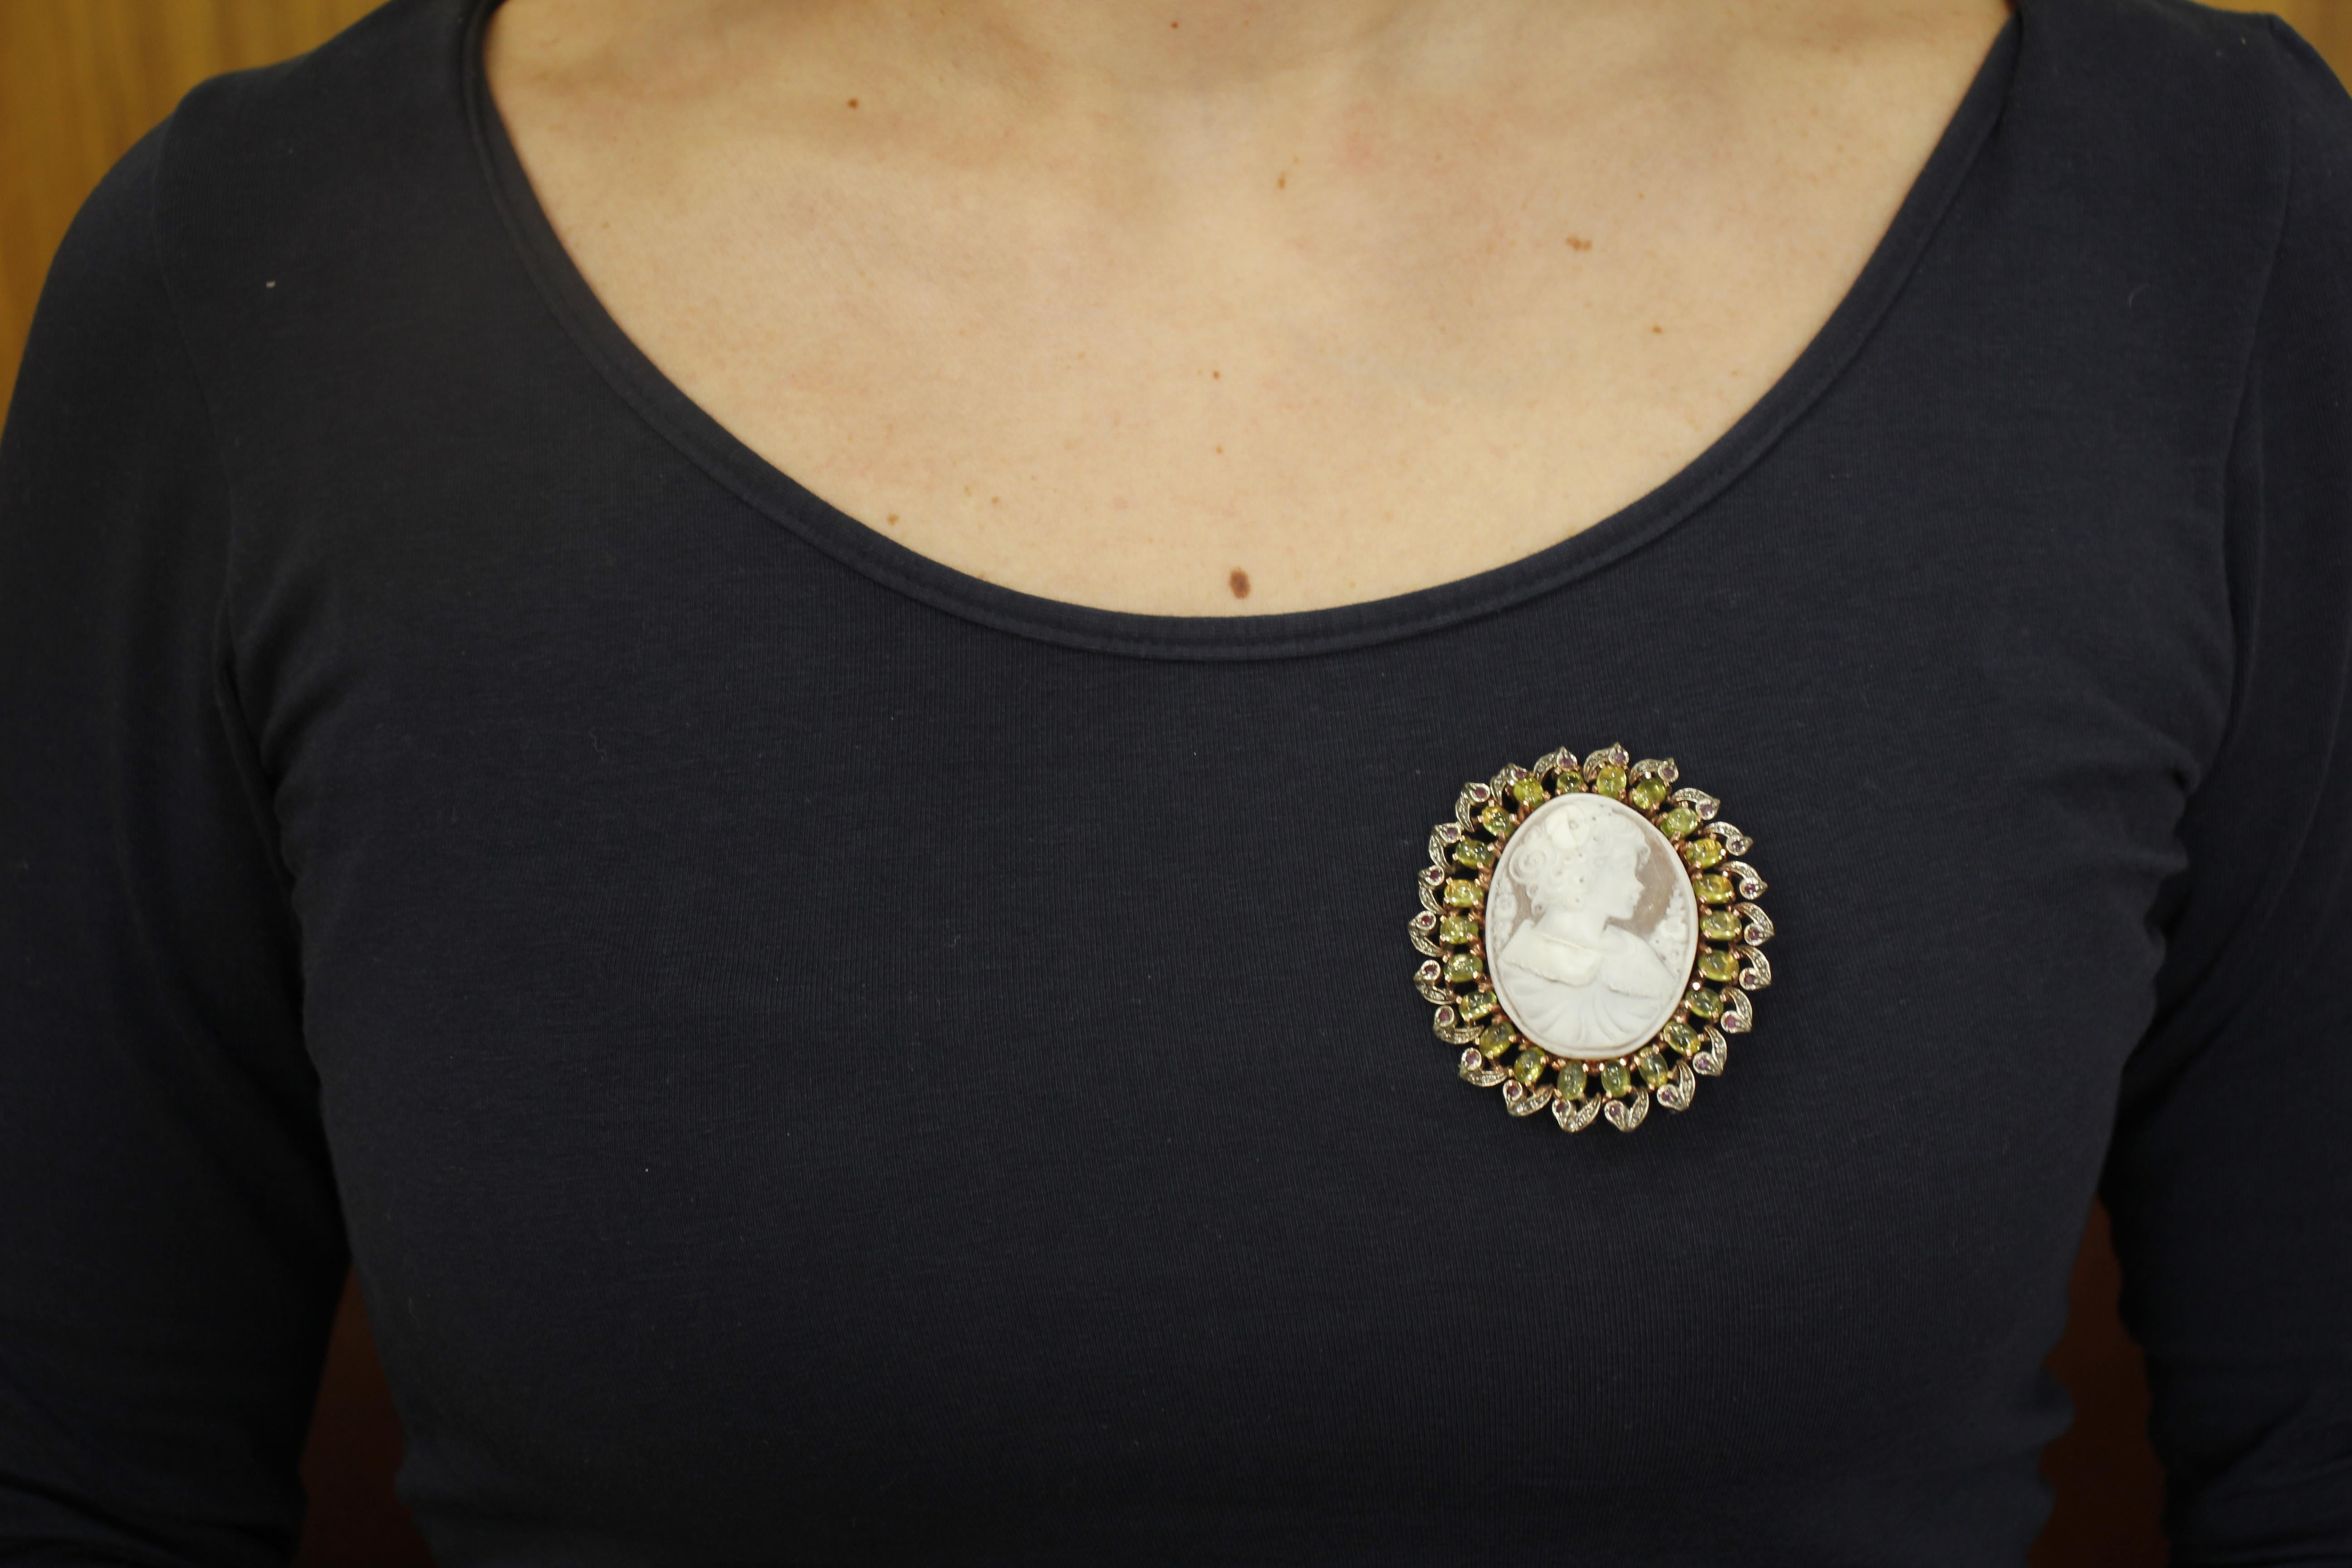 Cameo, Peridot, Diamonds, Rubies, 9 Karat Rose Gold and Silver Pendant/Brooch For Sale 2